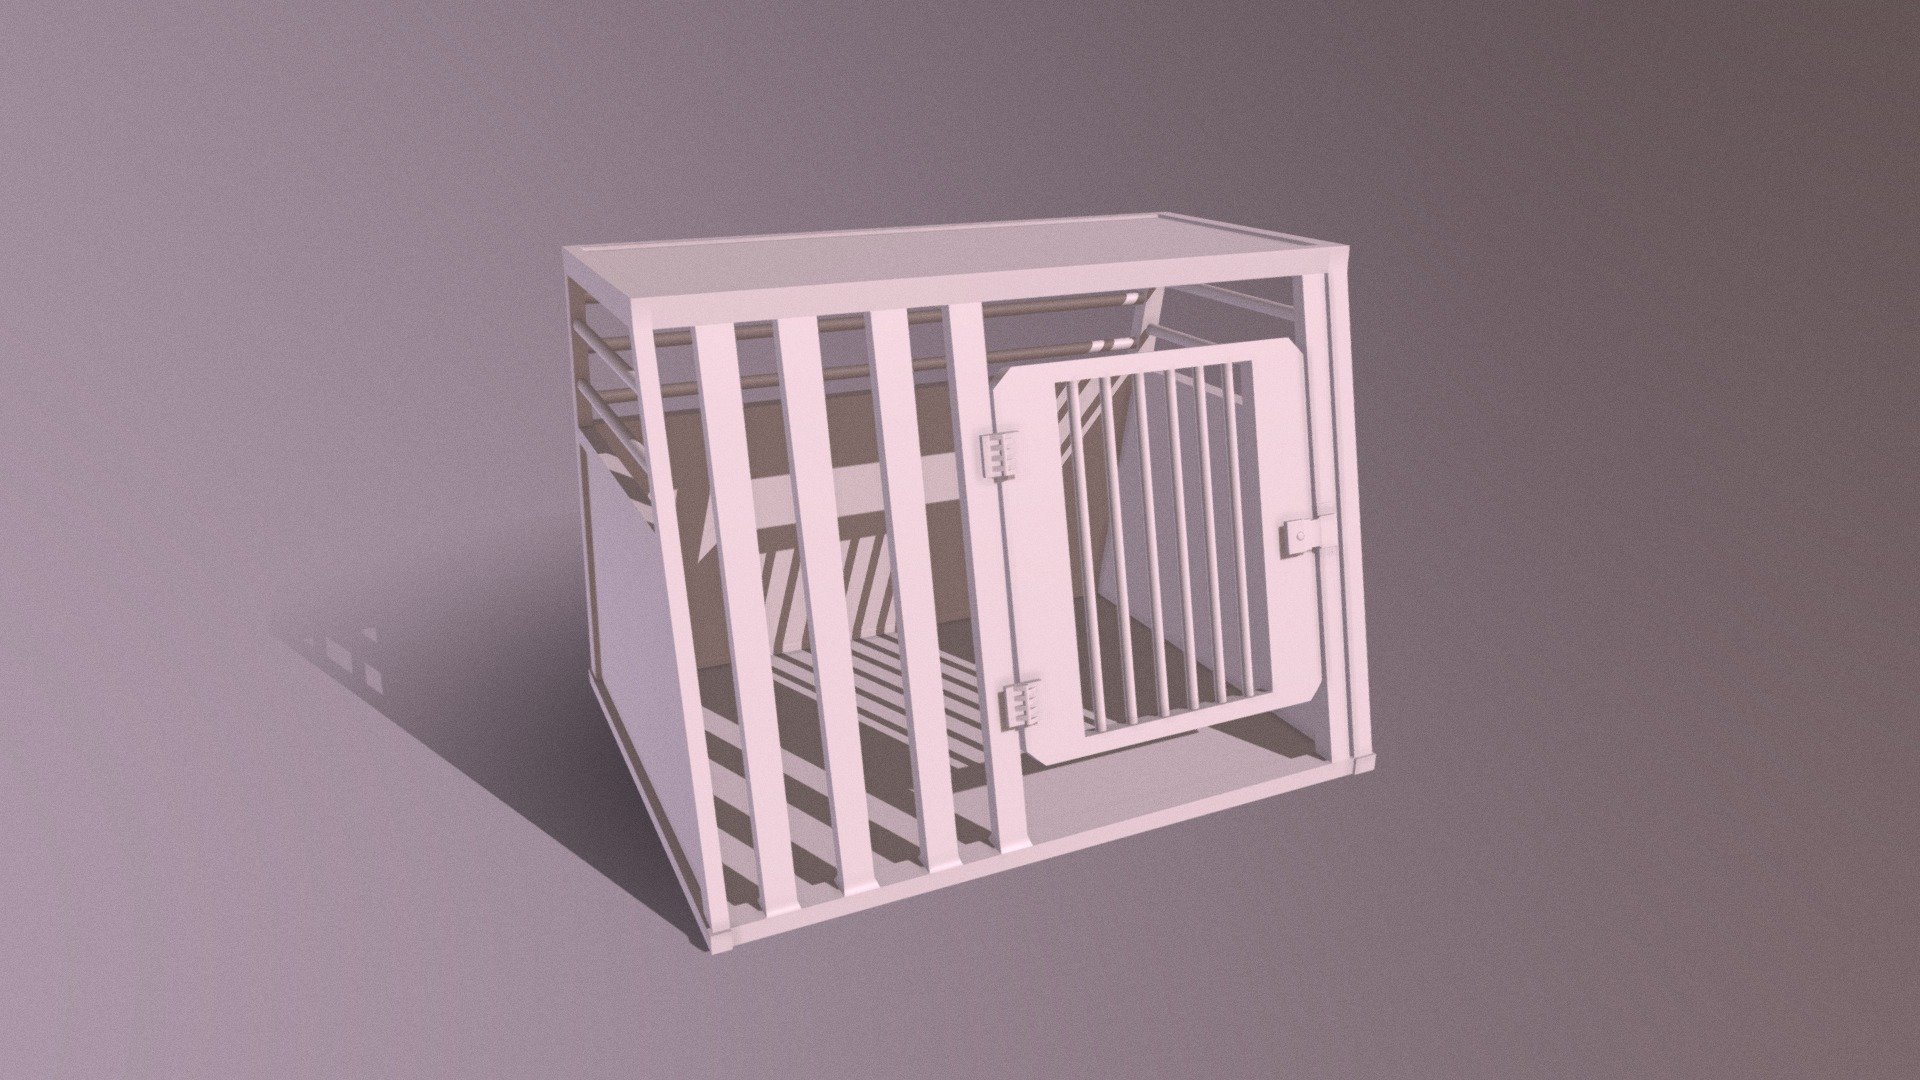 ** Reuploading for smooth polygons

A crate project in my Principles of Game Design class! I always call these “Dog Prisons” because they are always so confined and small. I picked this style crate because of geometric it was, I figured it would be easy. The first time I modeled it, it was extraordinarily hard, and took me days. I am proud of my texture and lighting here, I am a fan of complimentary colors. I could imagine a small monster sitting in it, pretending to be a normal dog 3d model